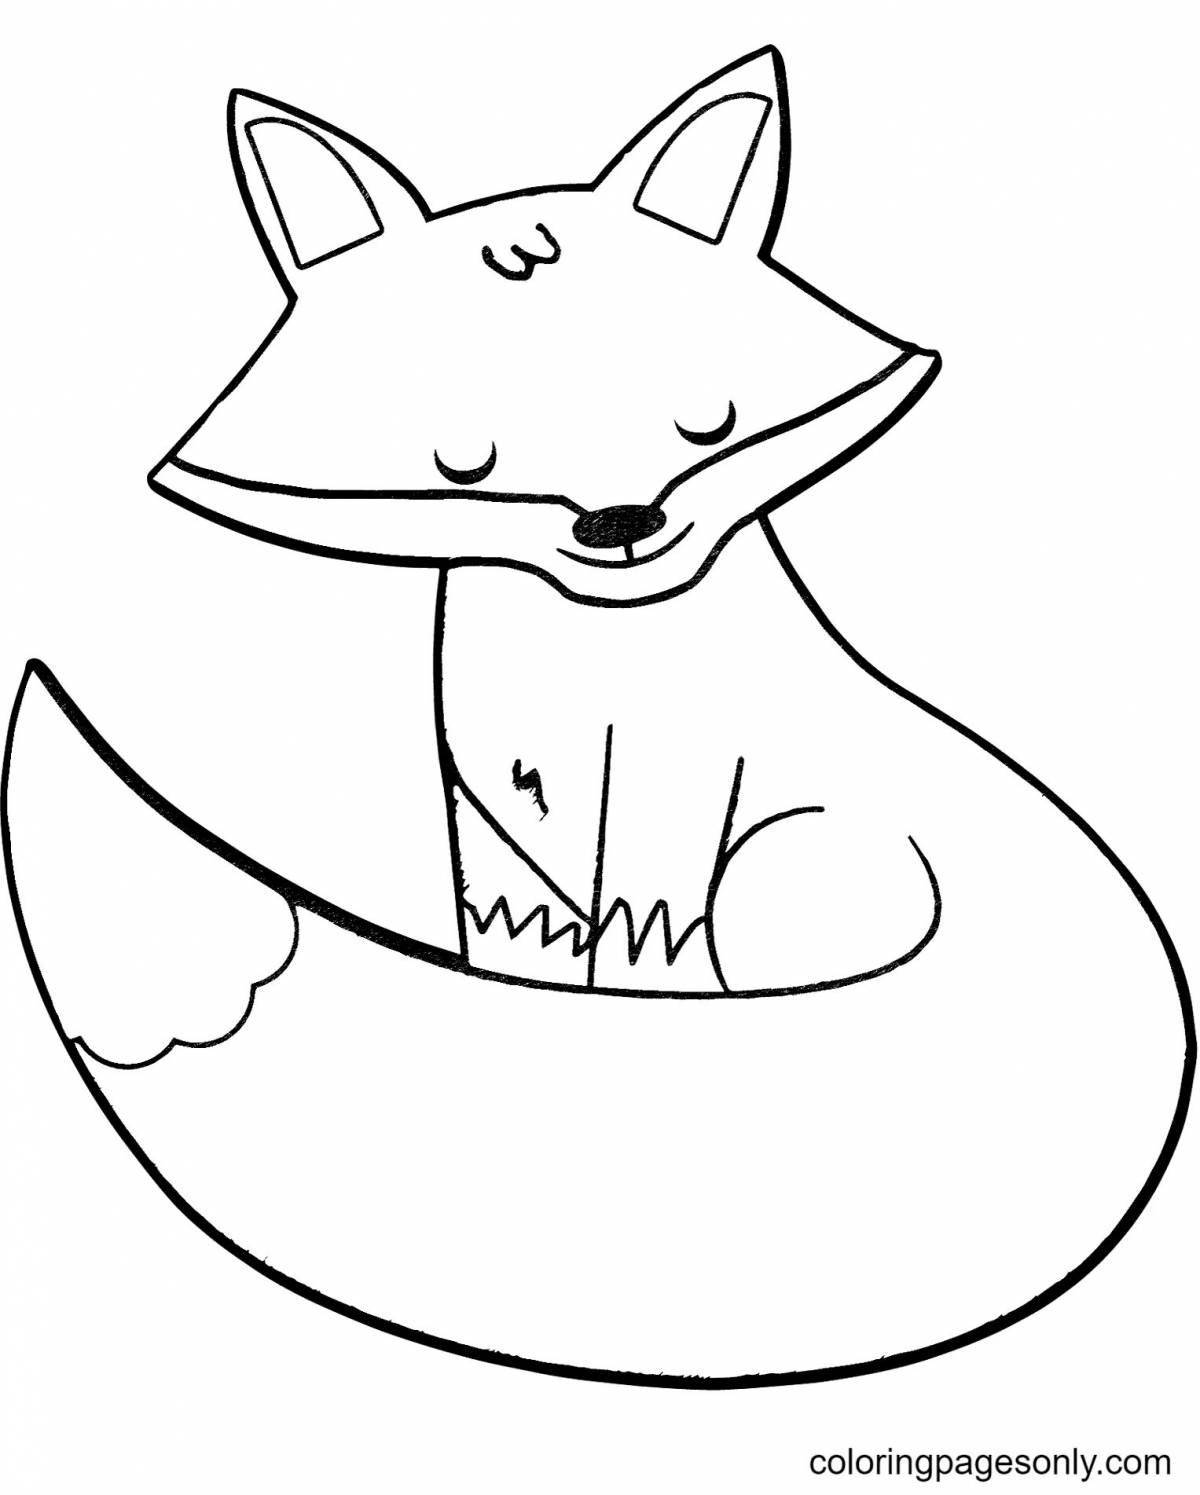 Coloring book playful fox for children 3-4 years old